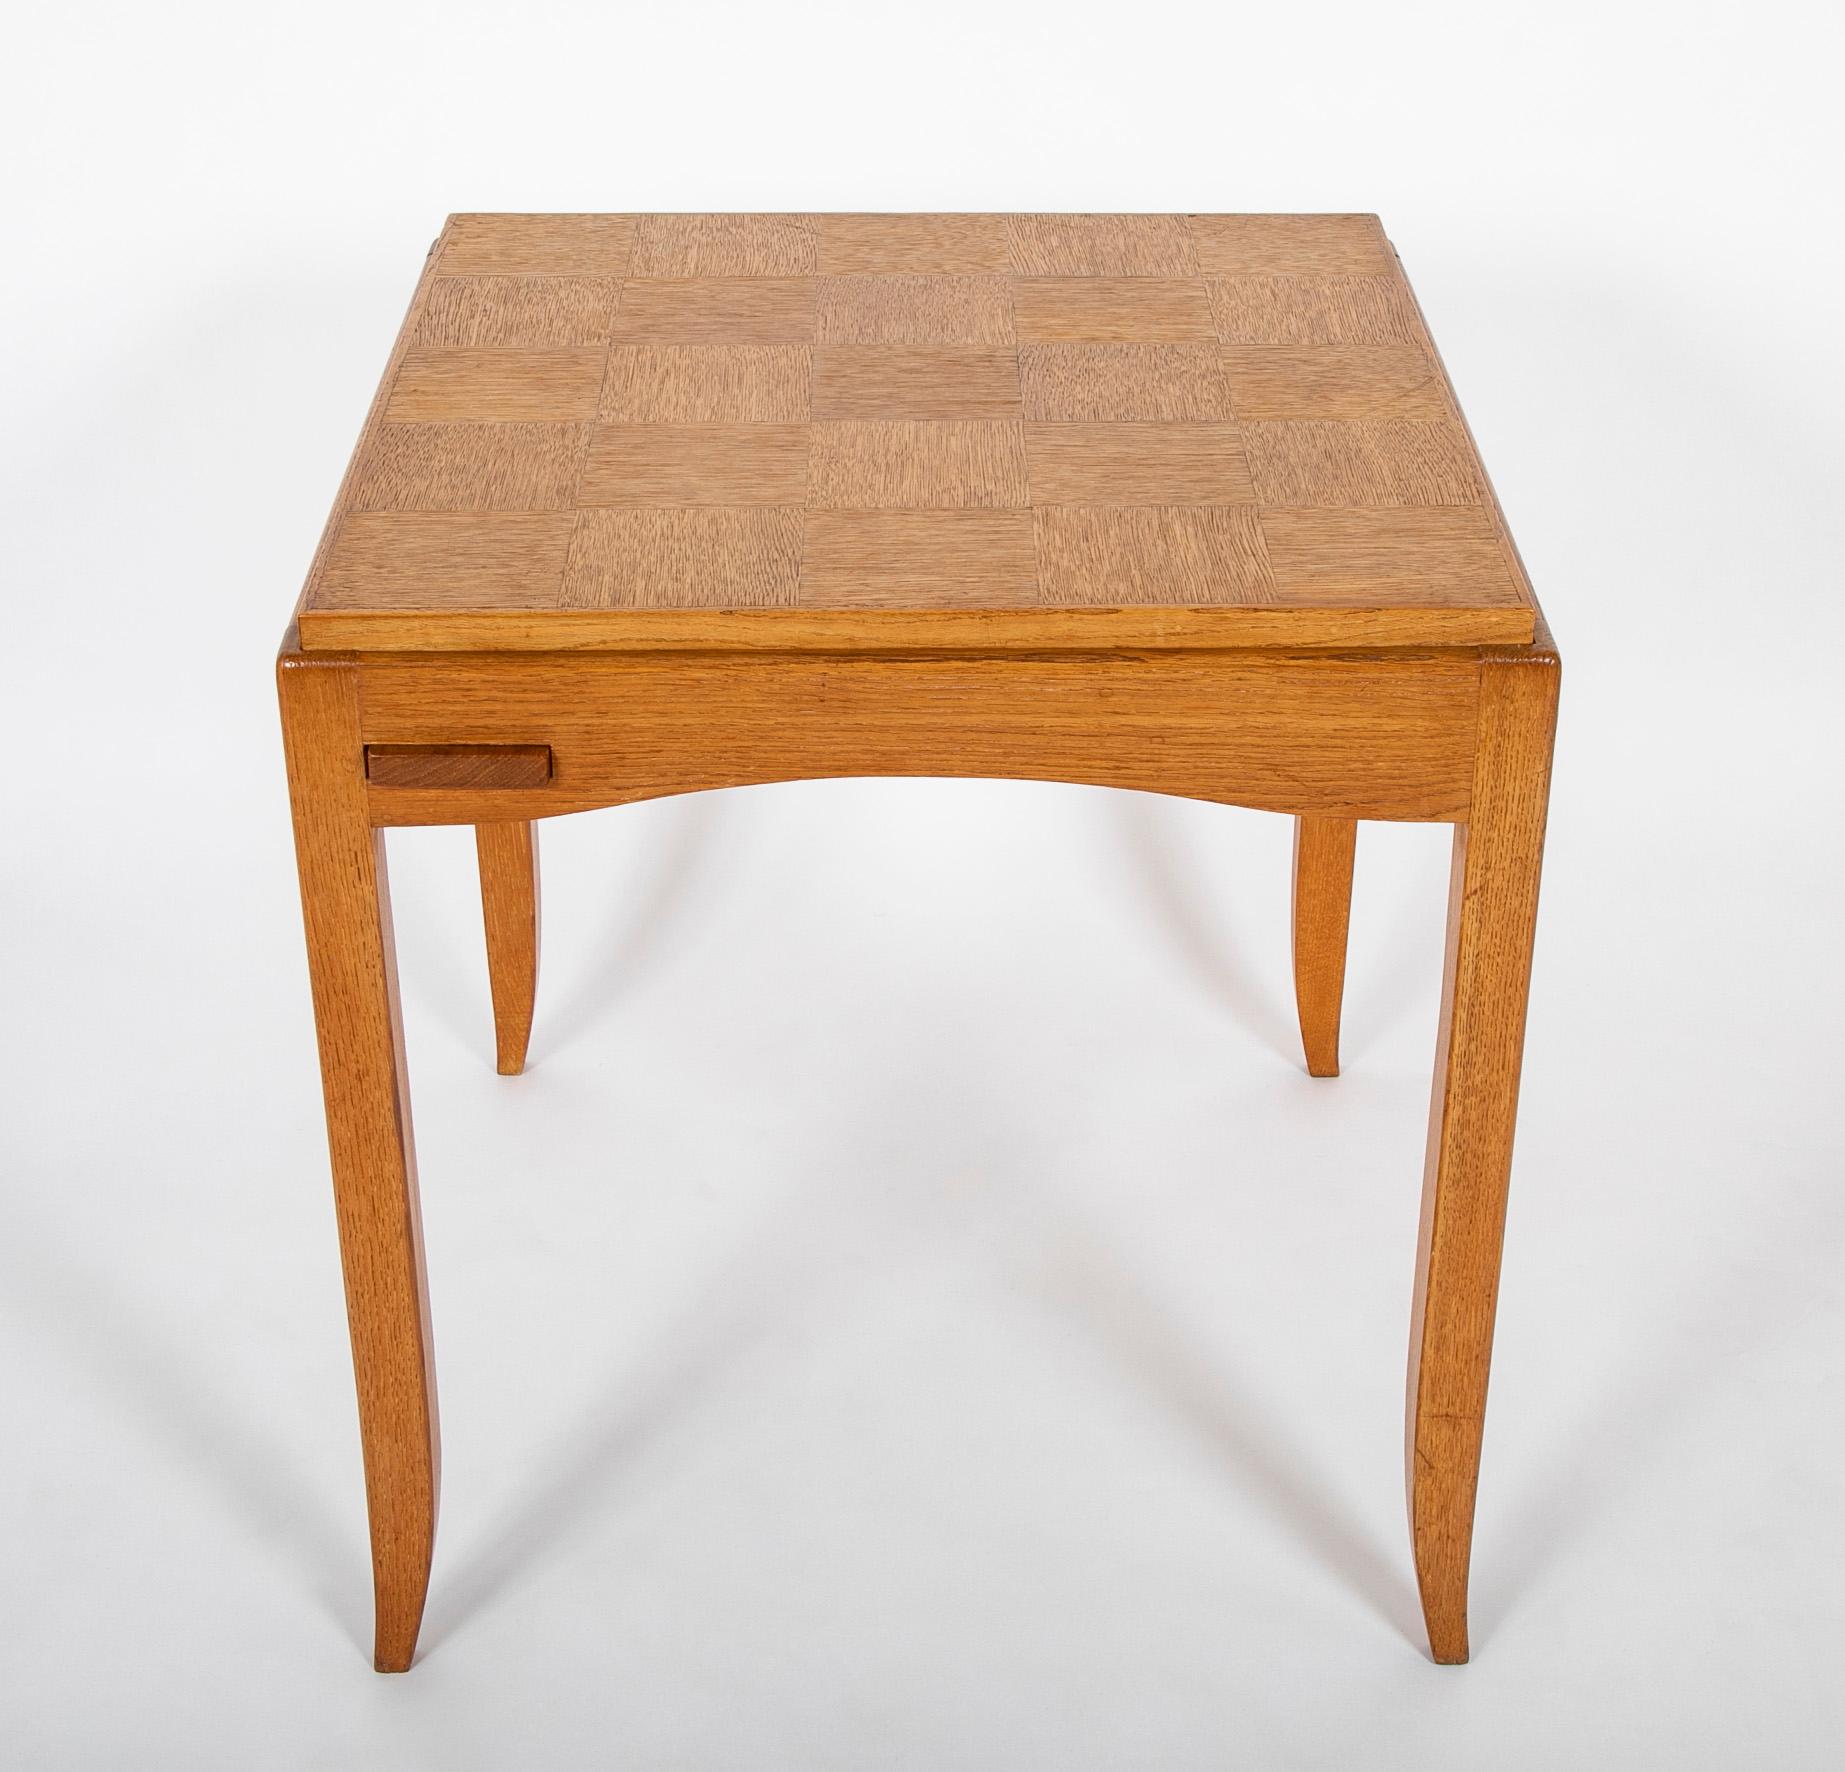 Oak games table with parquetry top, reversable to felt, ending on sabre legs designed by Victor Courtray ( French., 1896 - 1987 ).  Circa 1950's.